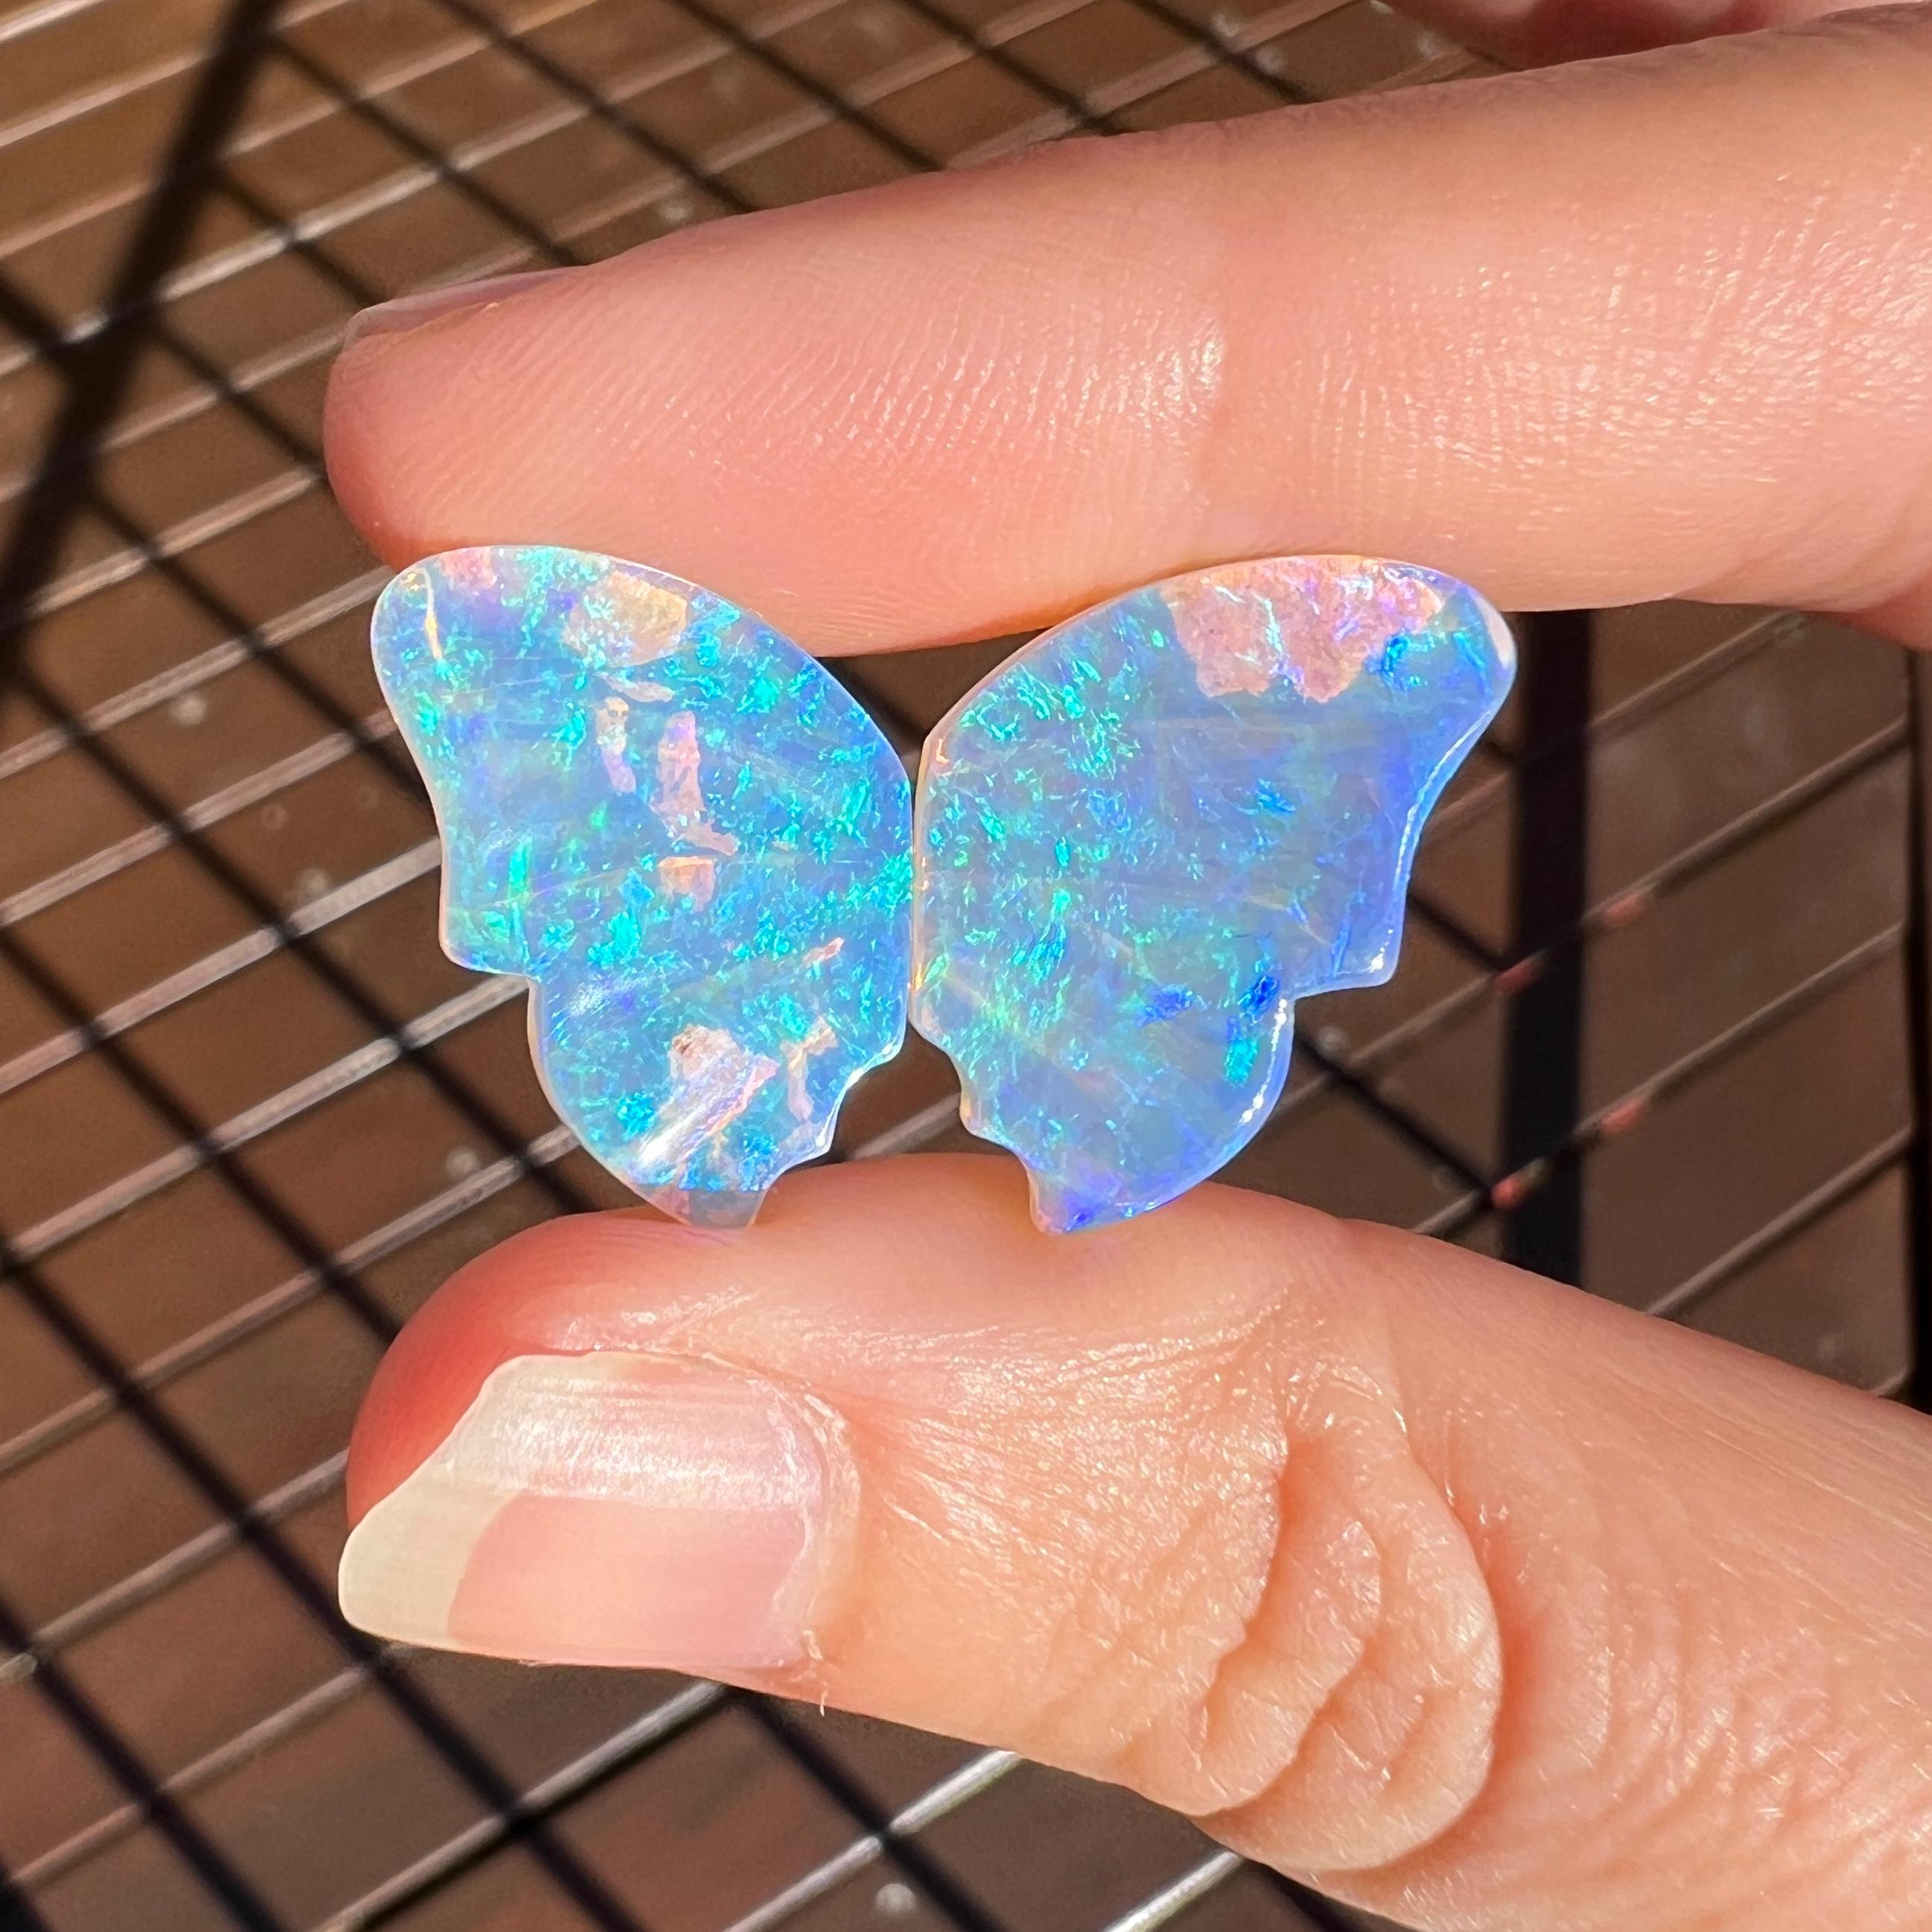 This beautiful 12.35 Ct natural Australian gem crystal opal, carved into a pair of butterfly wings, is a truly exceptional addition to any collection, mined by Sue Cooper herself. Its rarity, coupled with the amazing winged carving, captivates